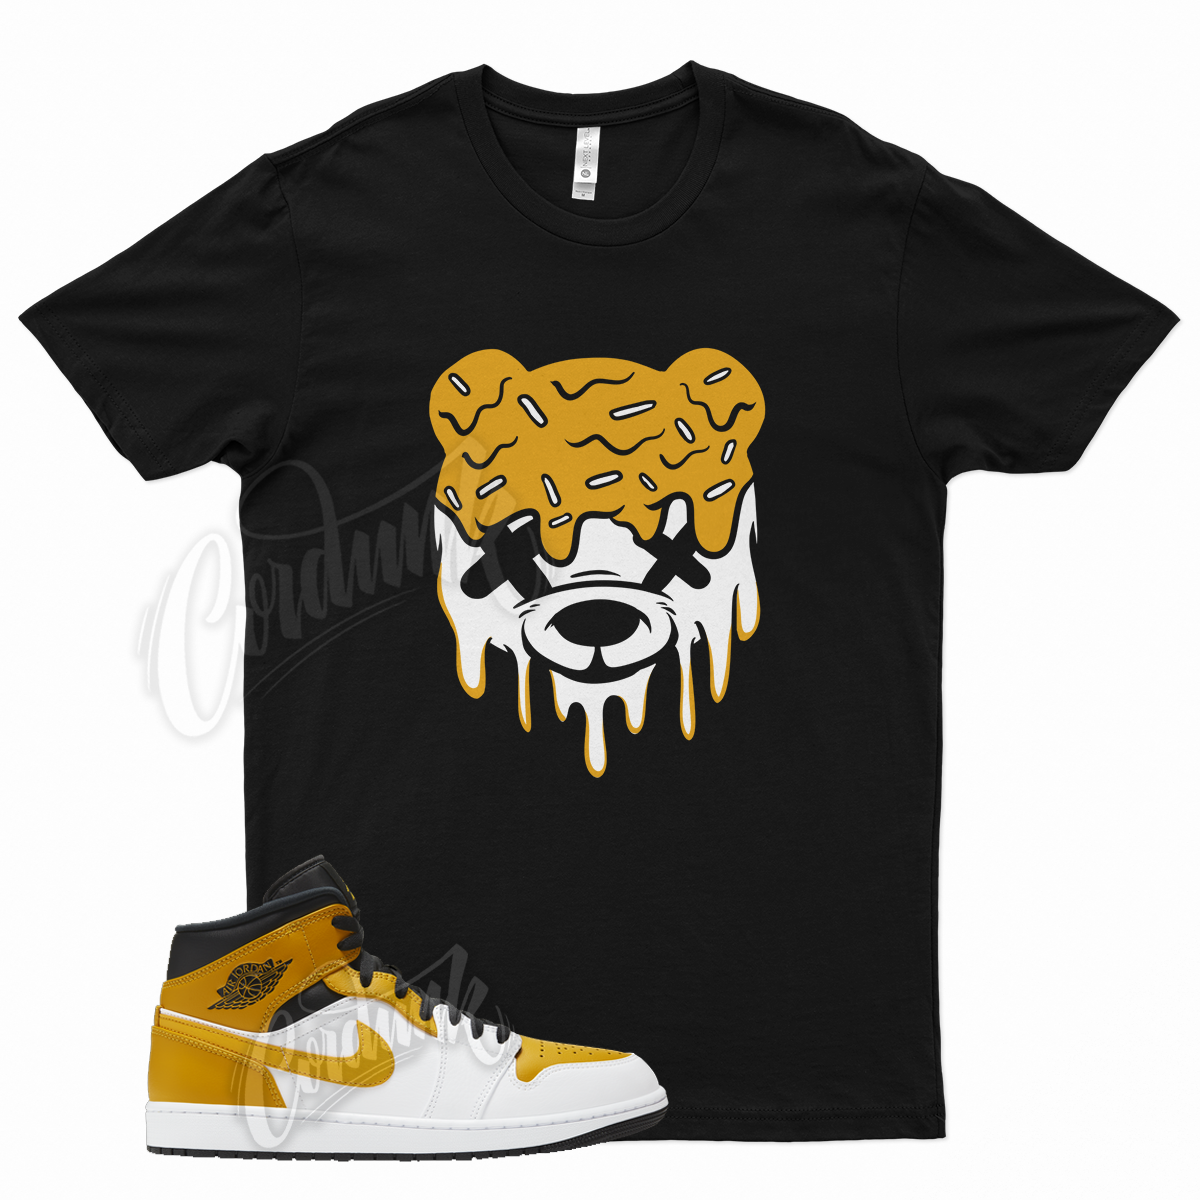 Primary image for Black DRIPPY T Shirt for Air J1 1 Mid University Gold White